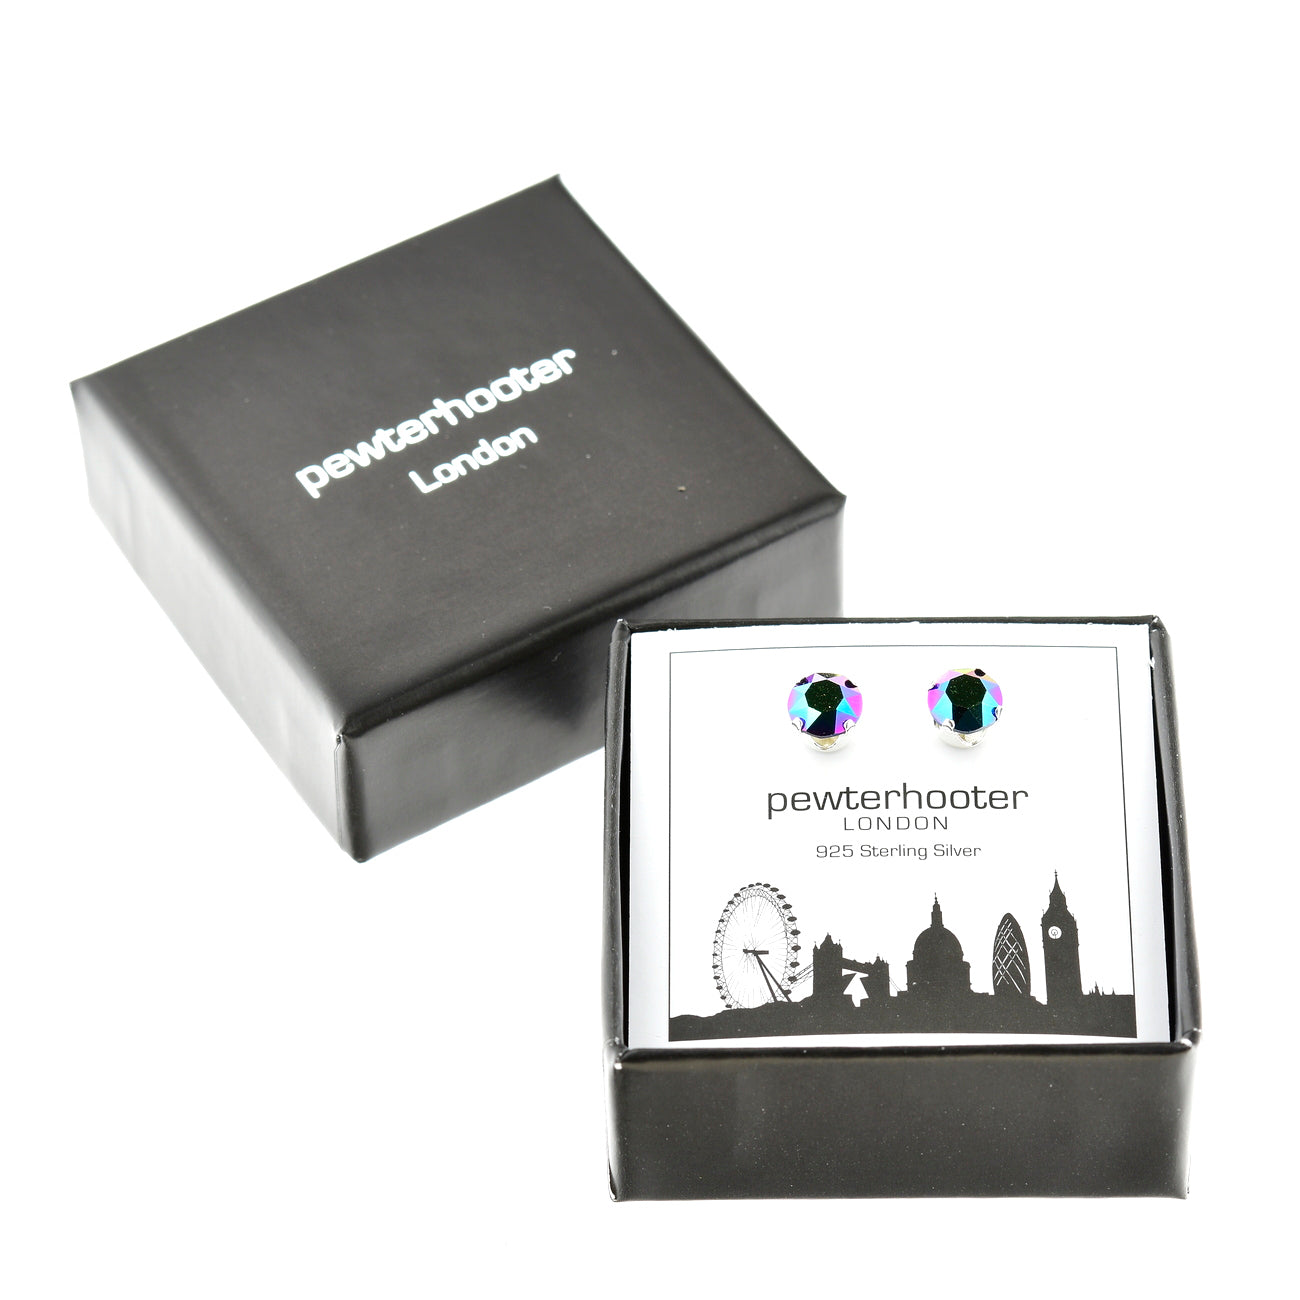 pewterhooter® Women's Classic Collection 925 Sterling silver earrings with sparkling Scarabaeus Green crystals, packaged in a gift box for any occasion.